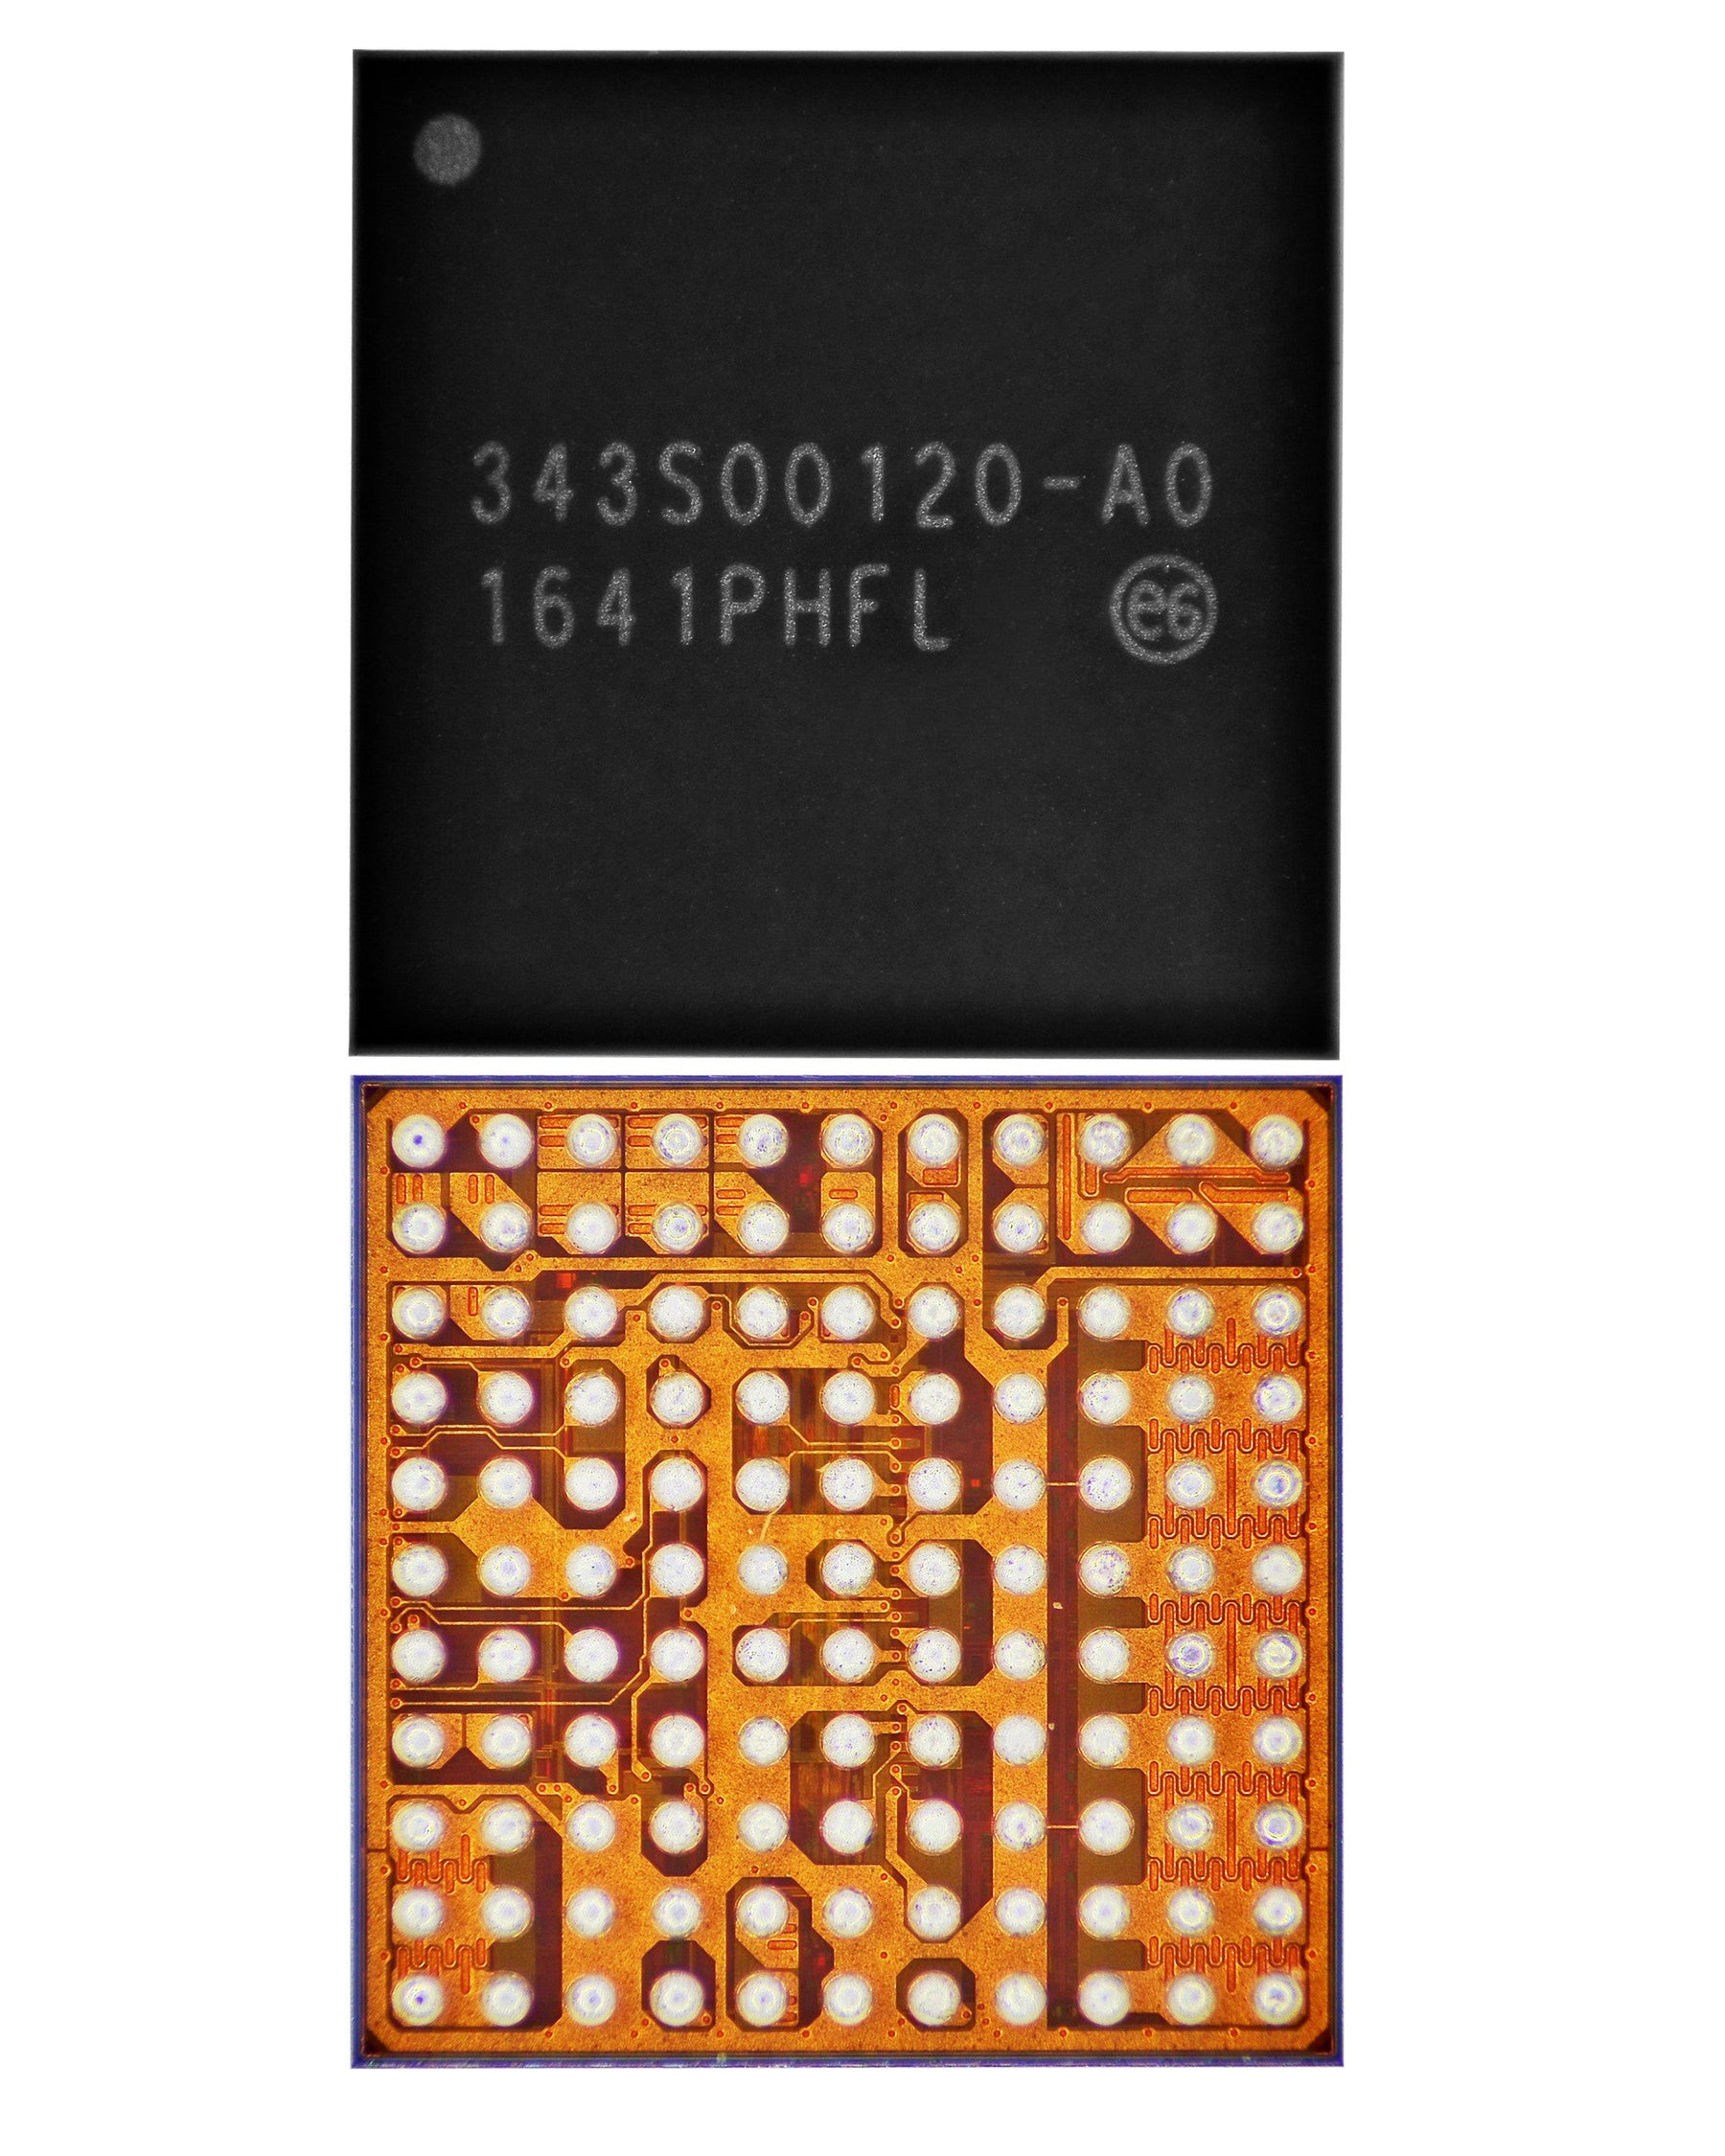 SMALL POWER IC FOR IPAD PRO 10.5" (343S00120)